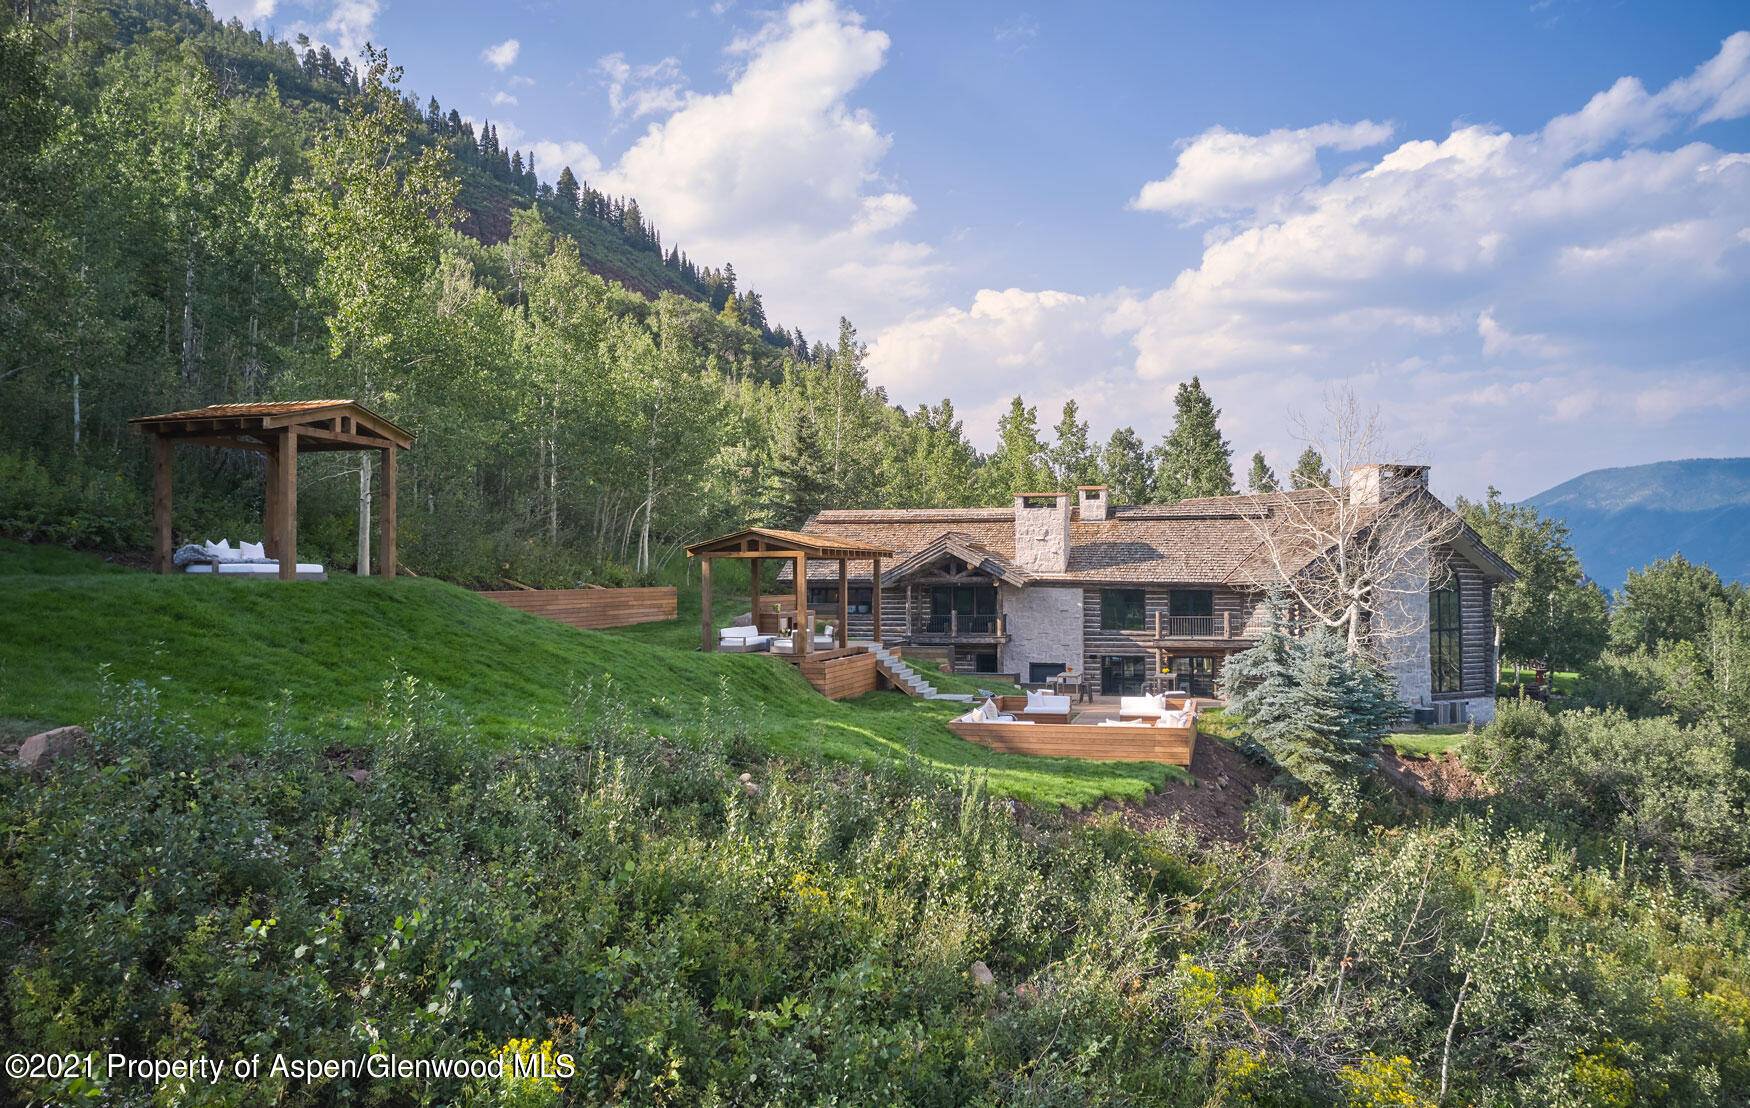 Atop Castle Creek dominating the valley in Aspen, Colorado, sits a new family compound.